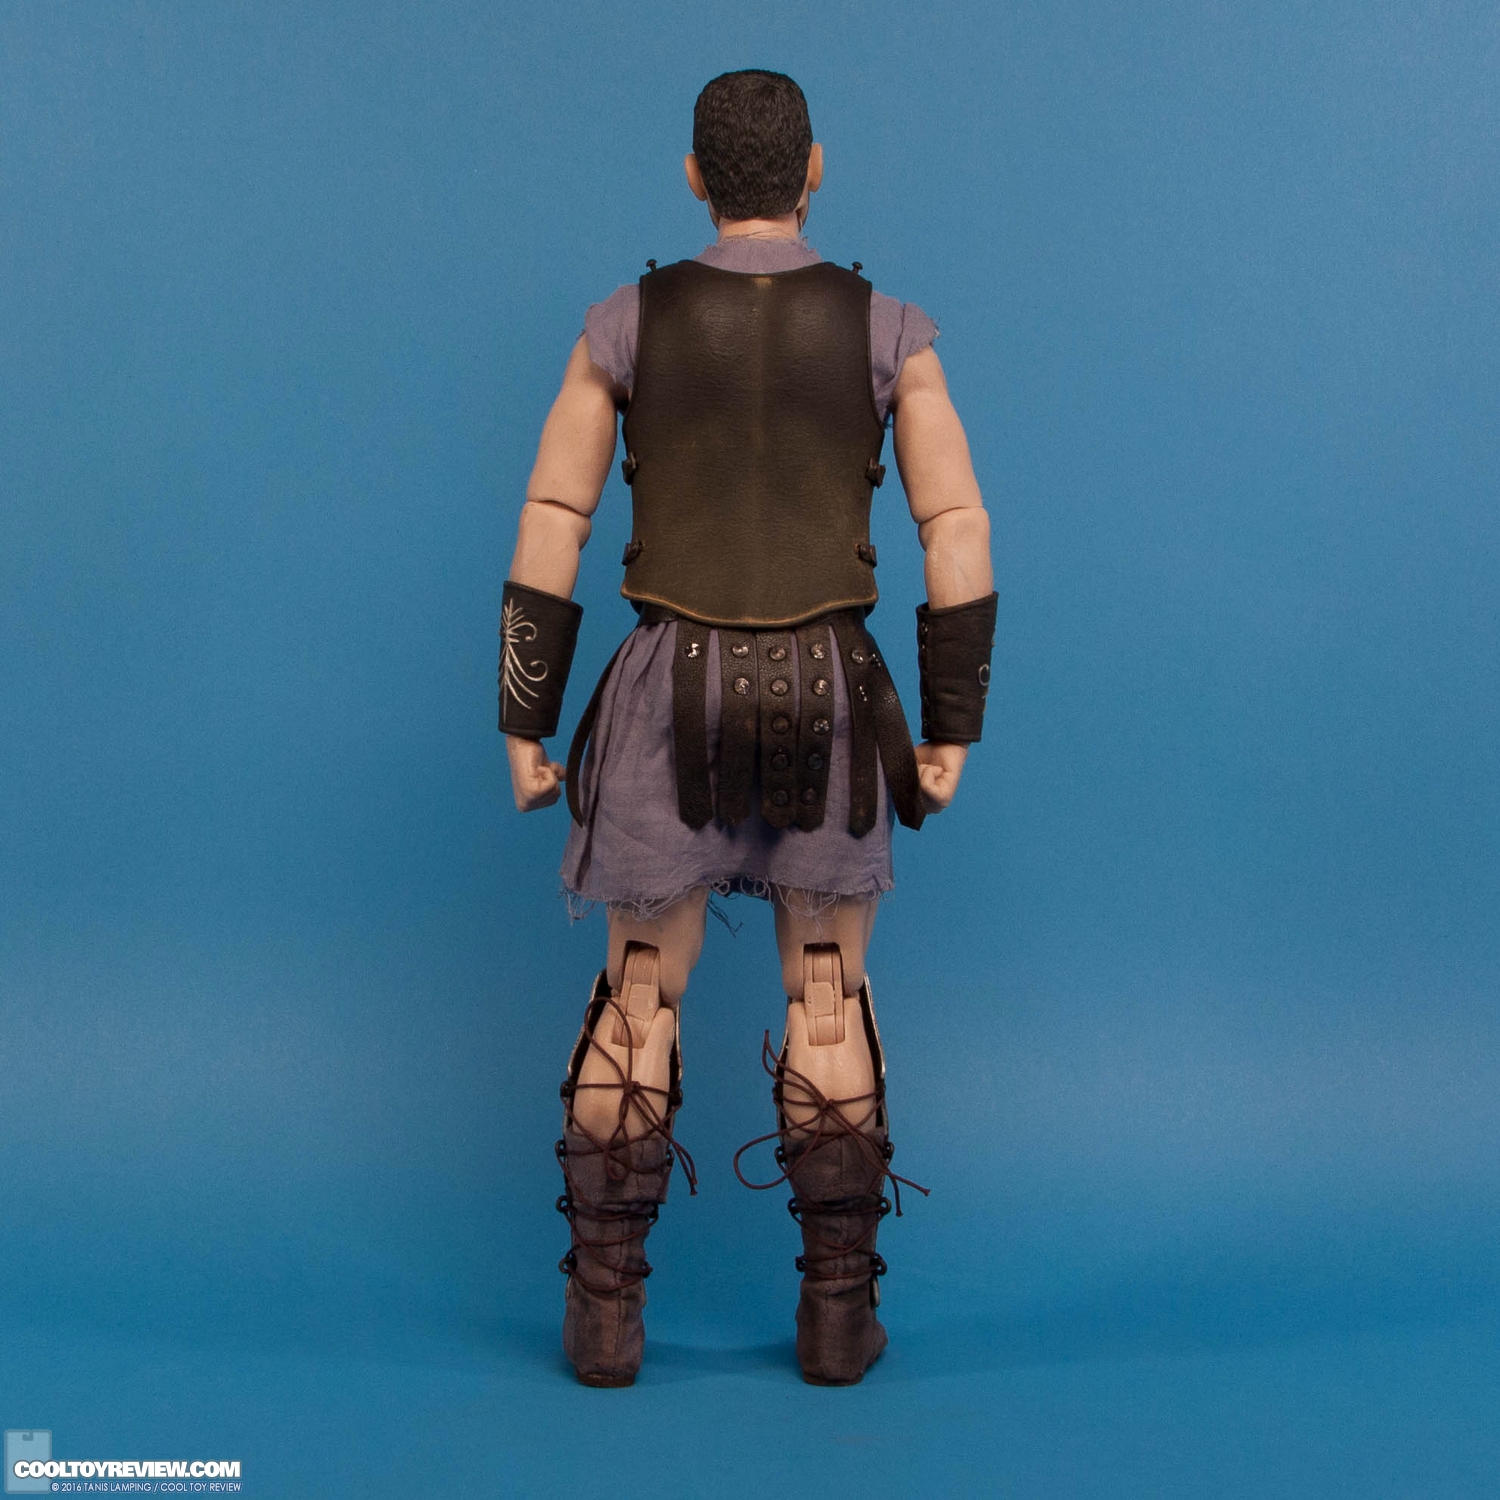 pangaea-toy-gladiator-general-sixth-scale-collectible-figure-020.jpg